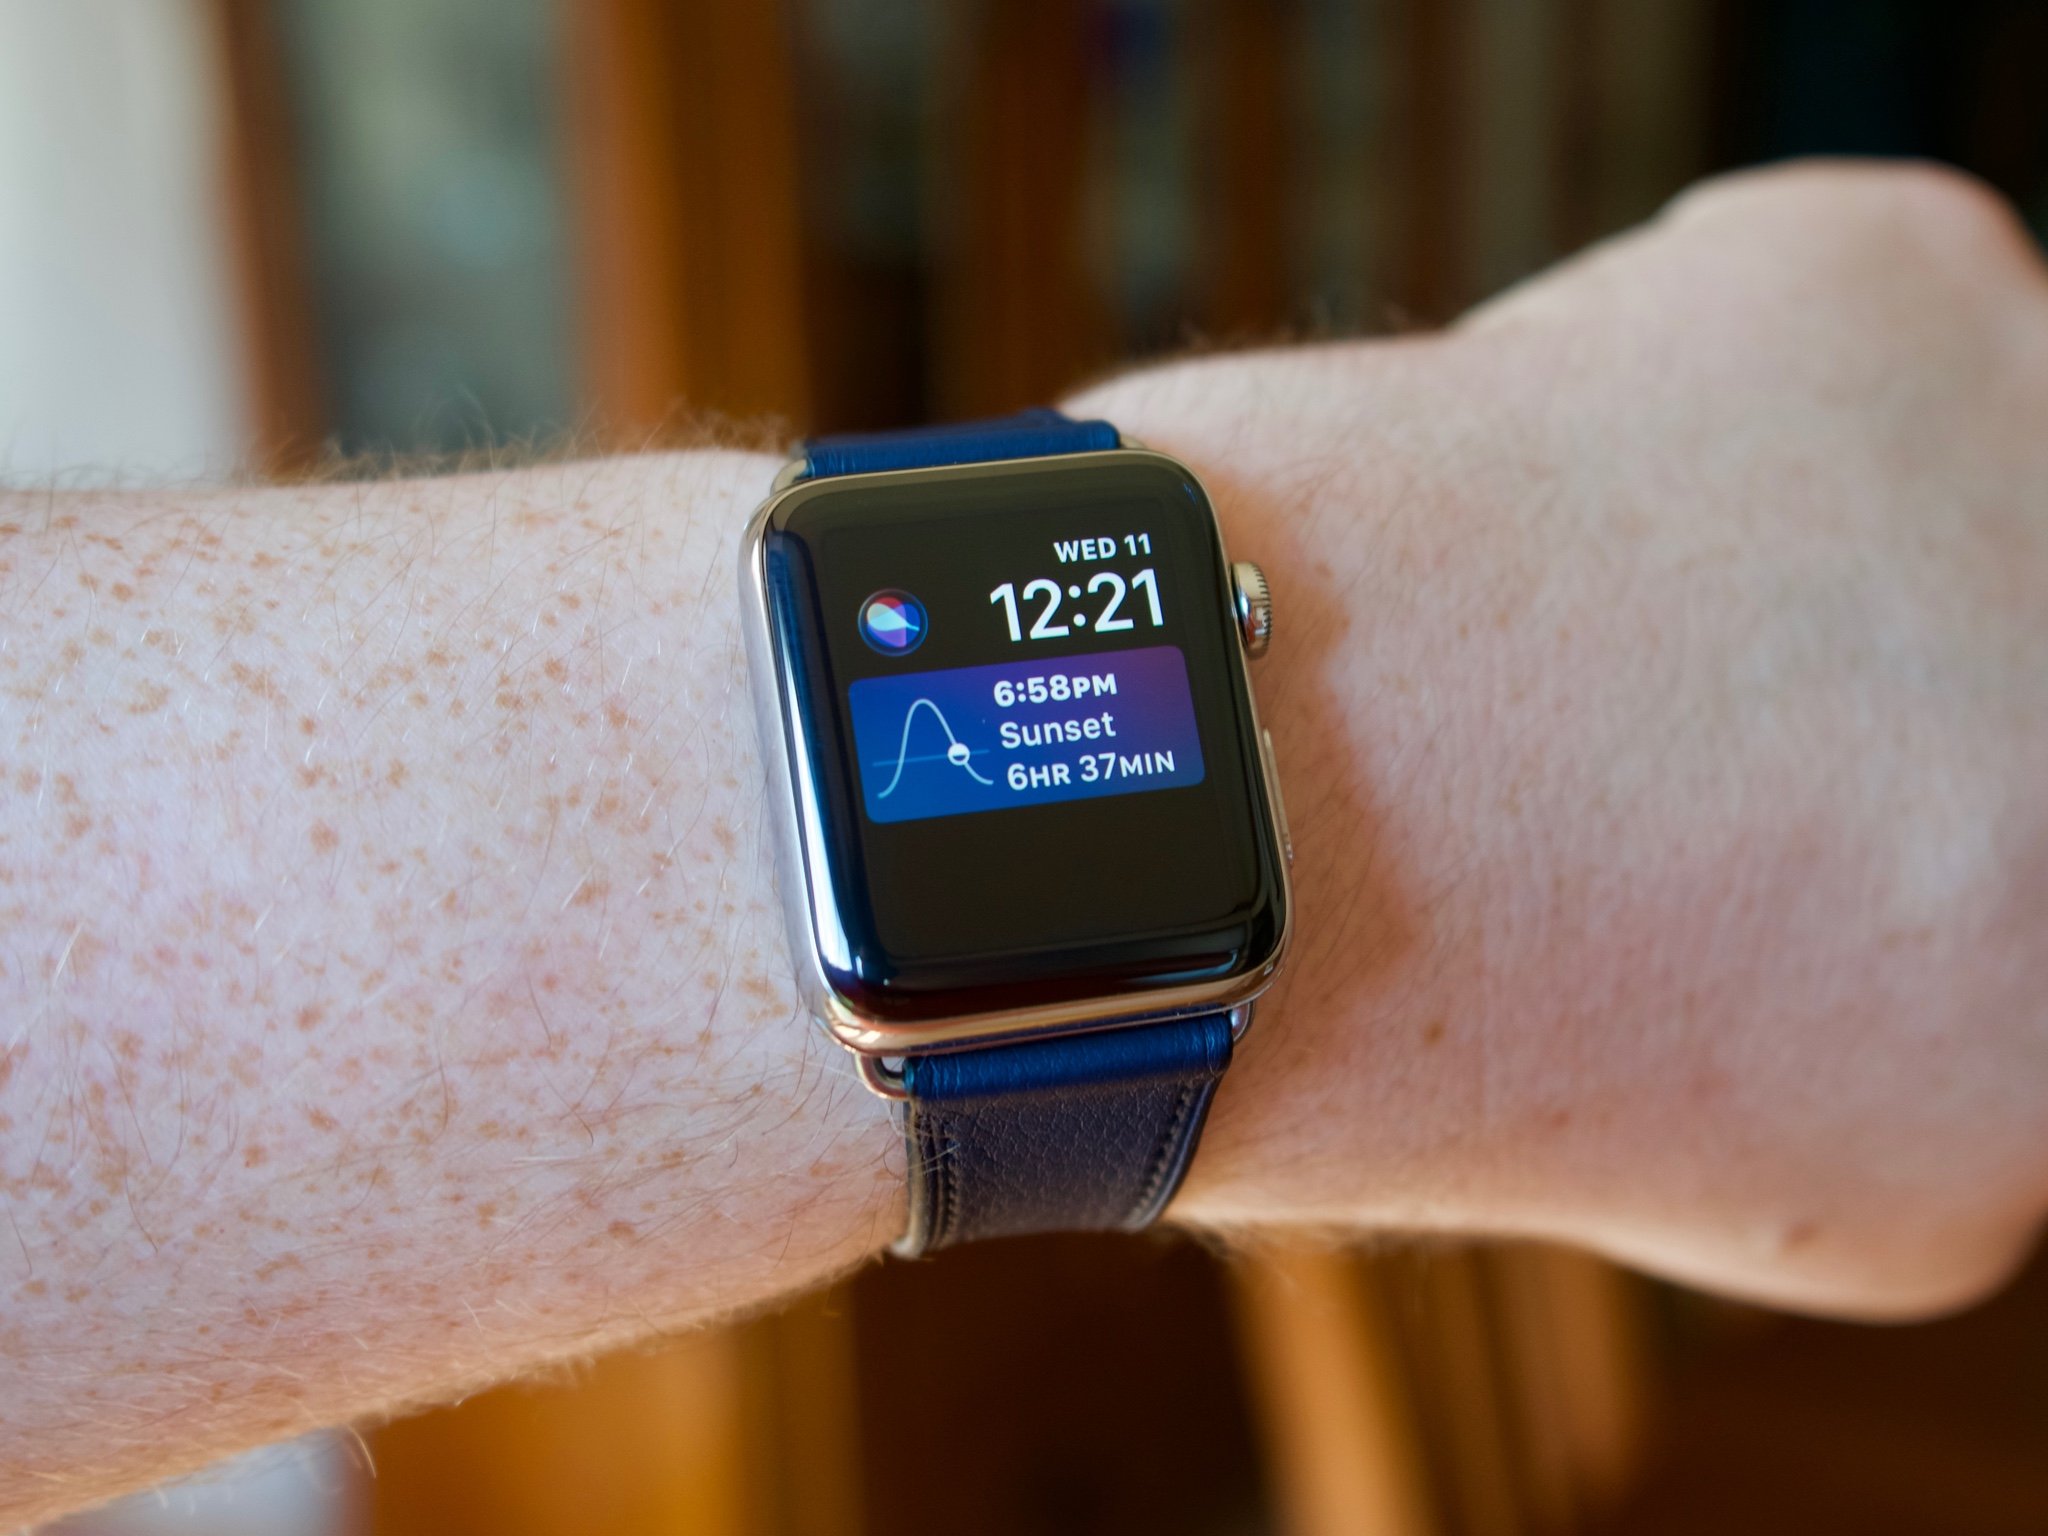 How to use the Siri watch face on your Apple Watch